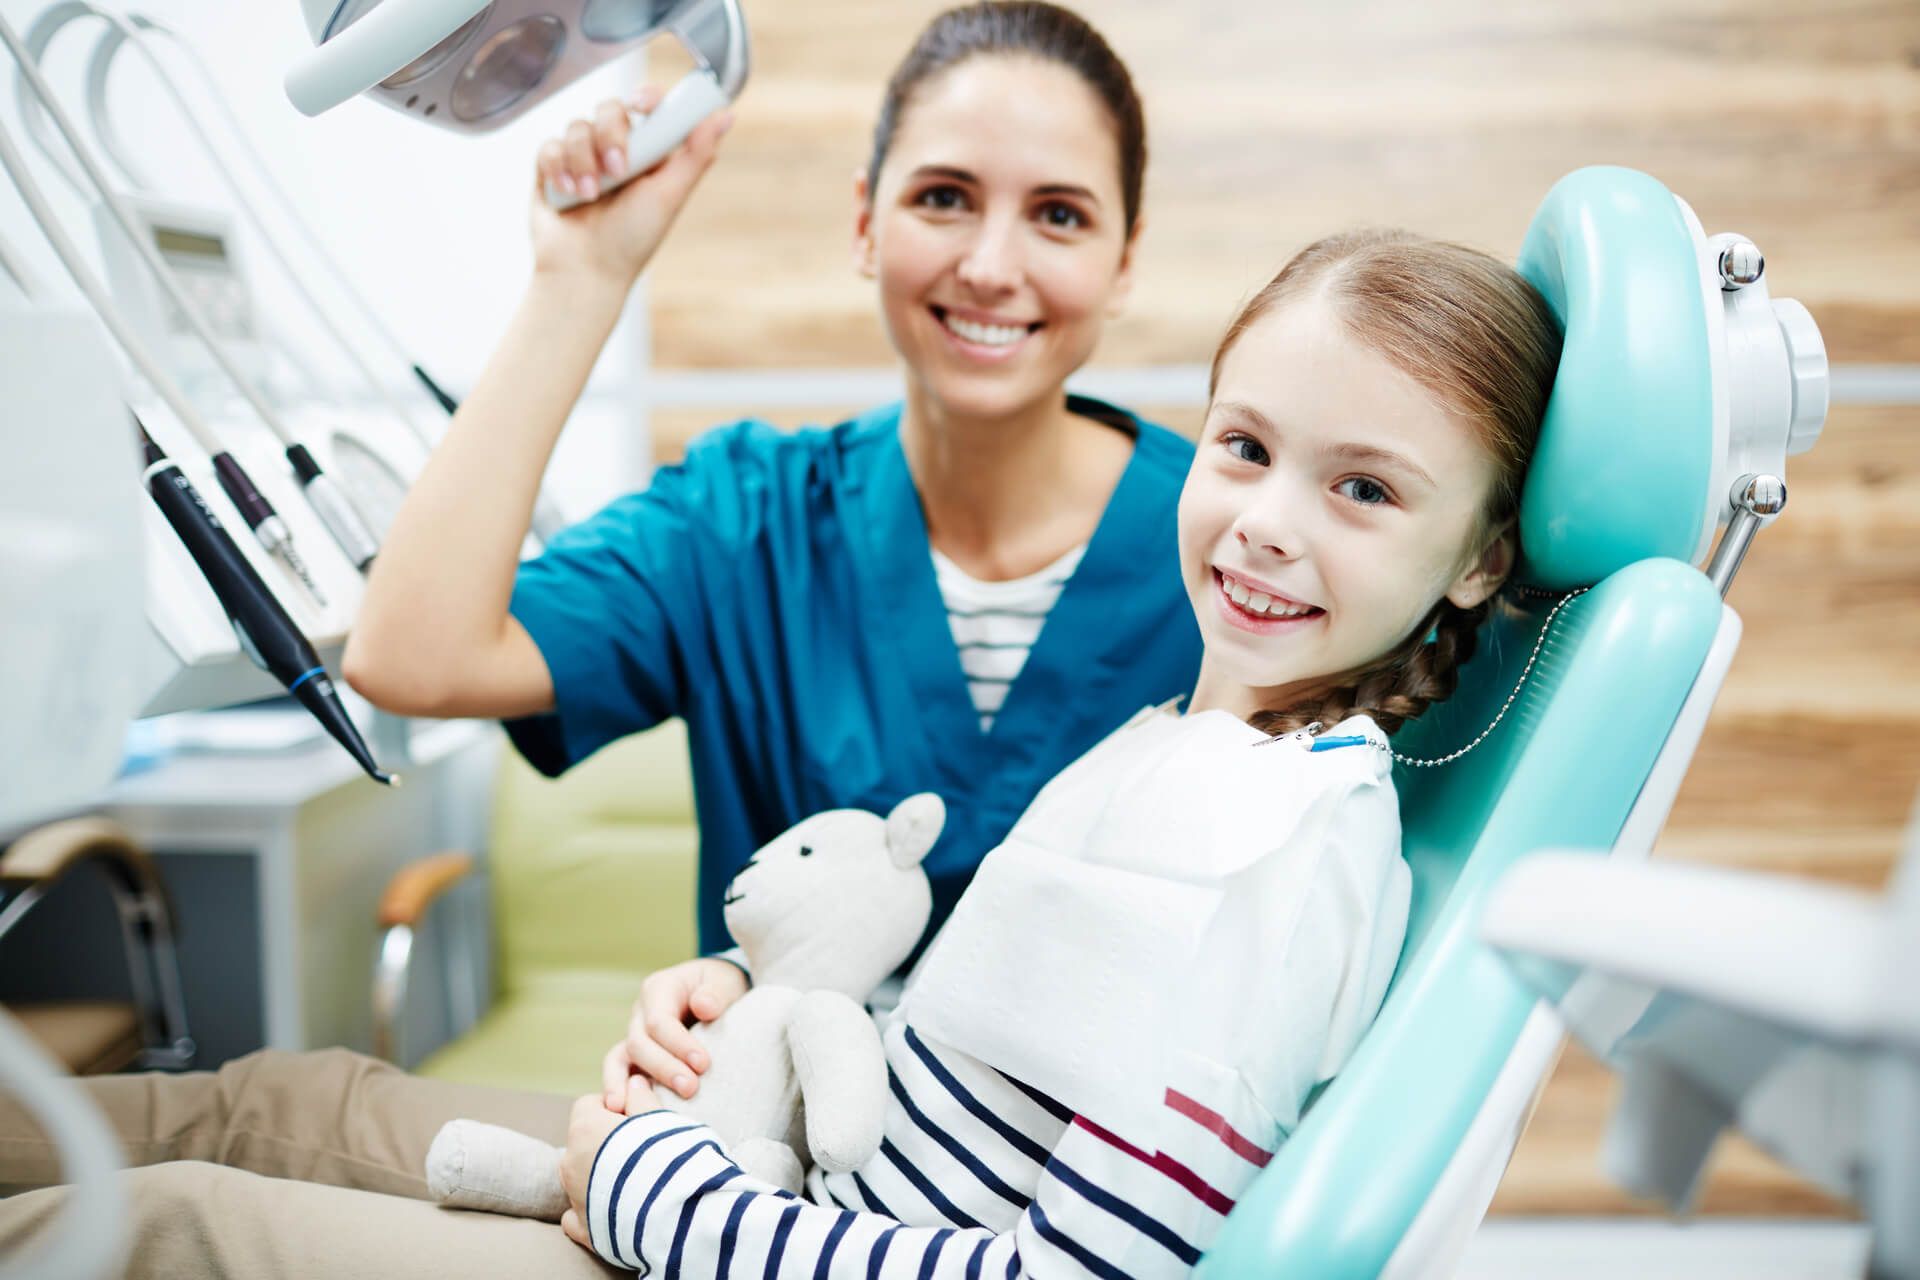 Little girl sitting in chair at dentist office with happy doctor near by